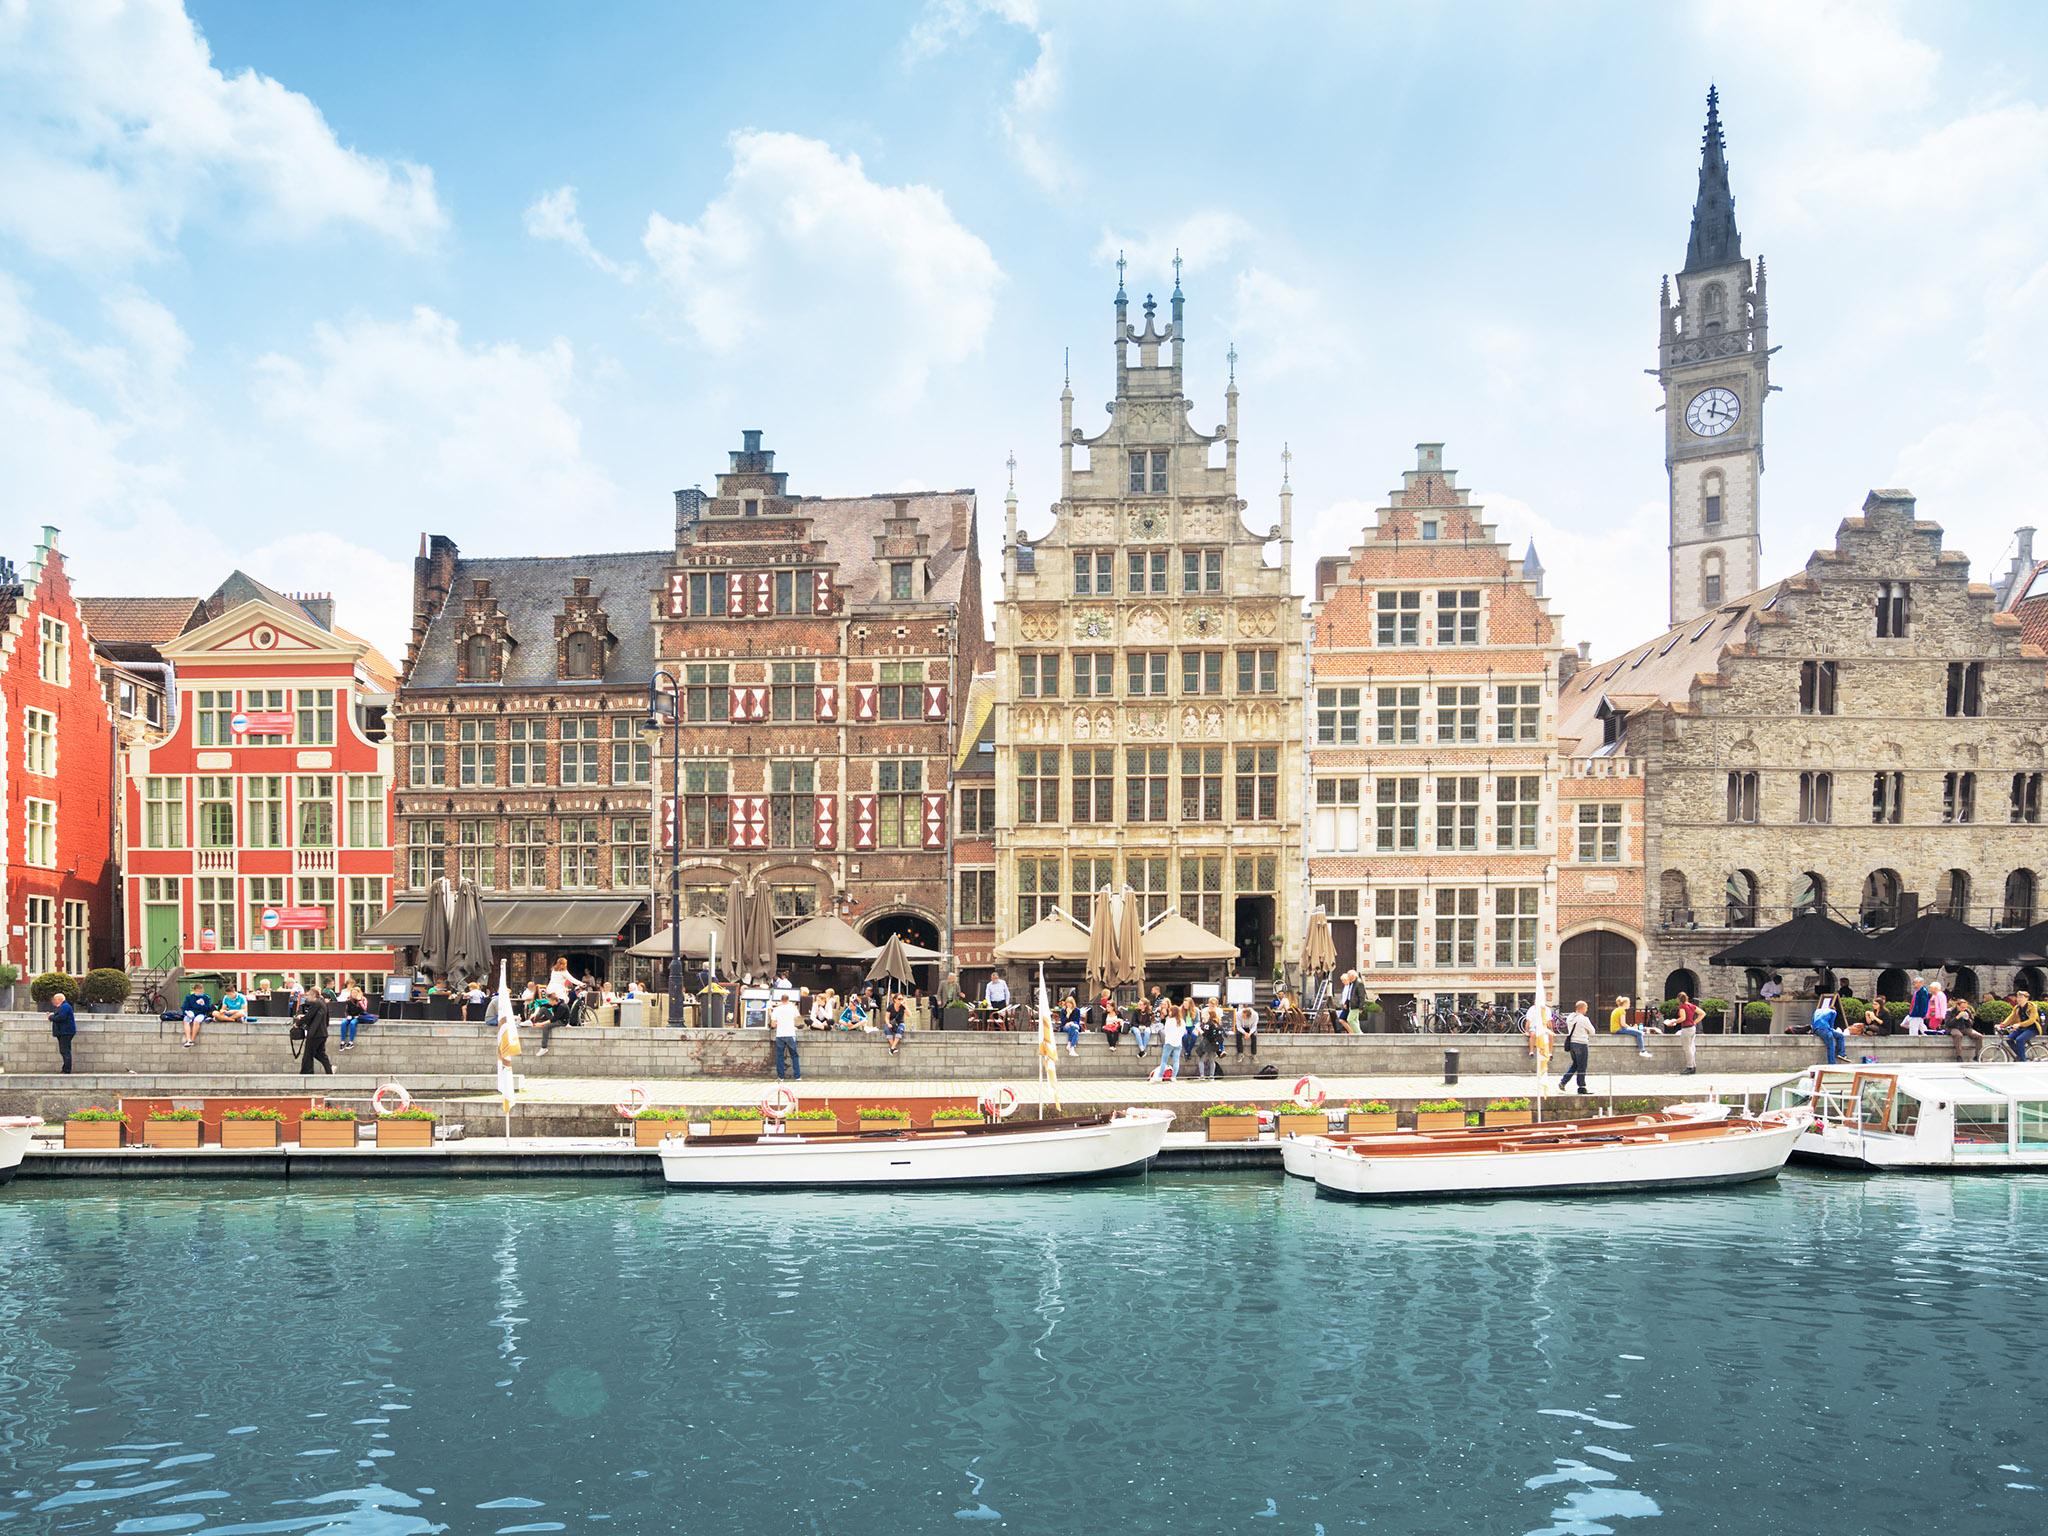 In Ghent, the government's aim to pedestrianise the city has been both applauded and criticised